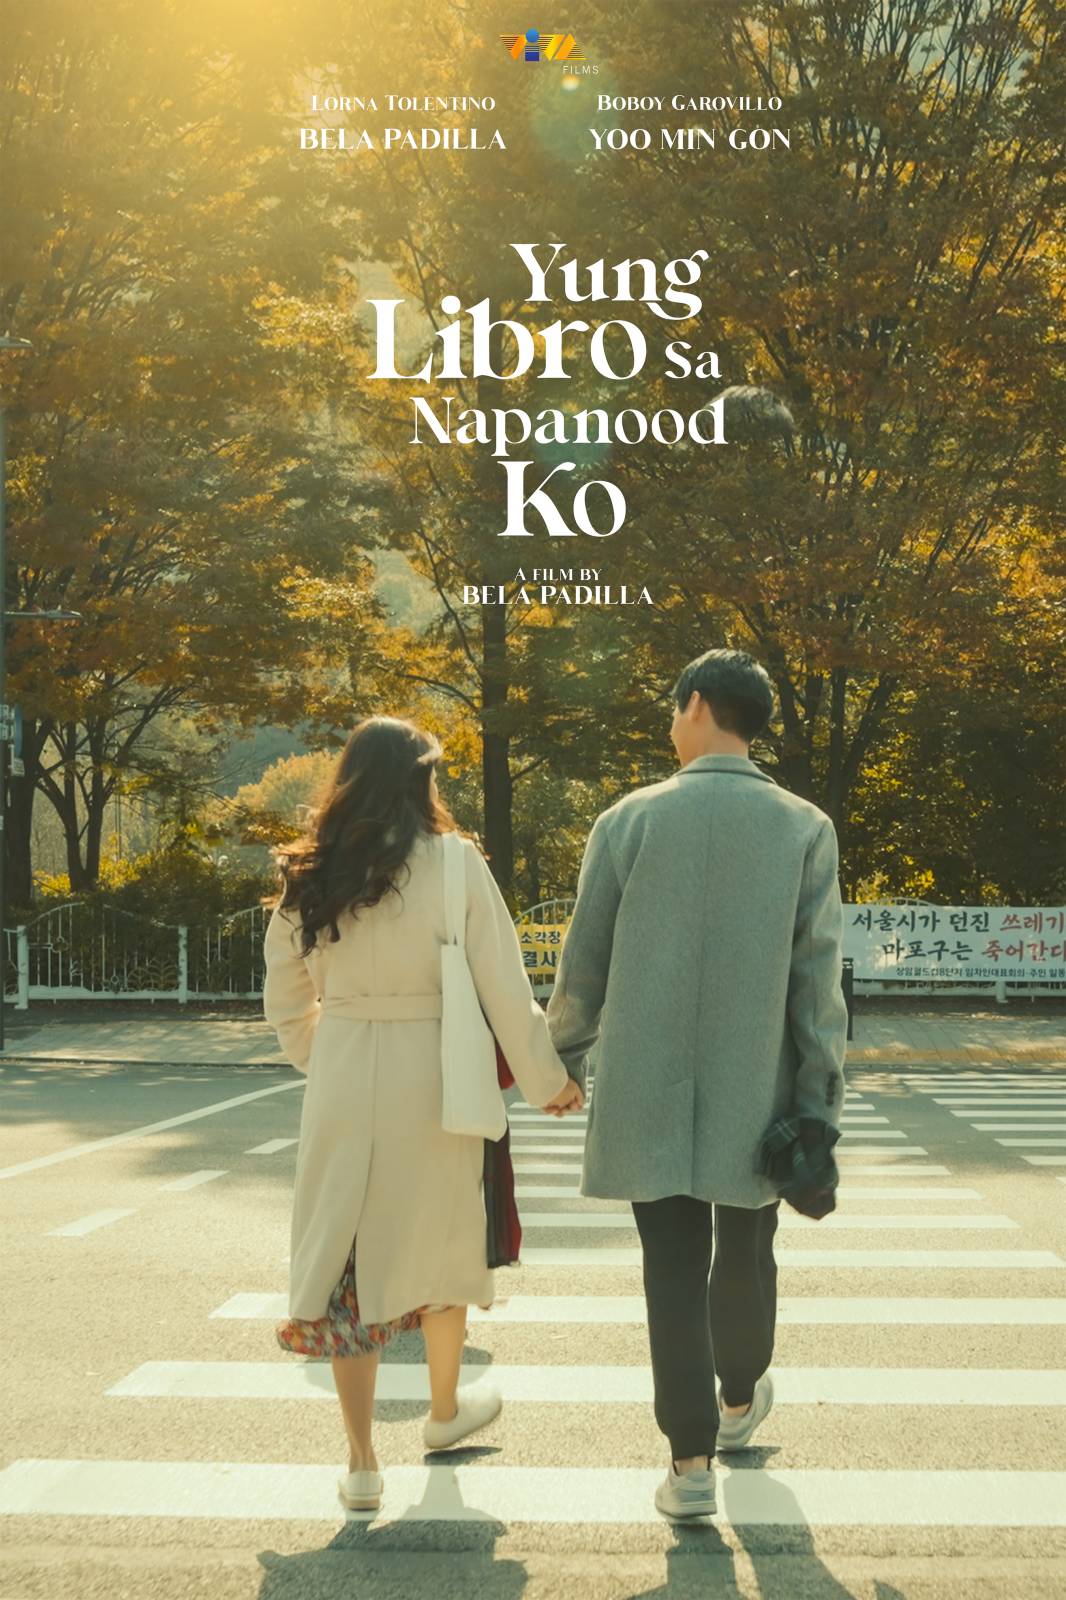 Yung Libro sa Napanood Ko Movie (2023) Cast, Release Date, Story, Budget, Collection, Poster, Trailer, Review